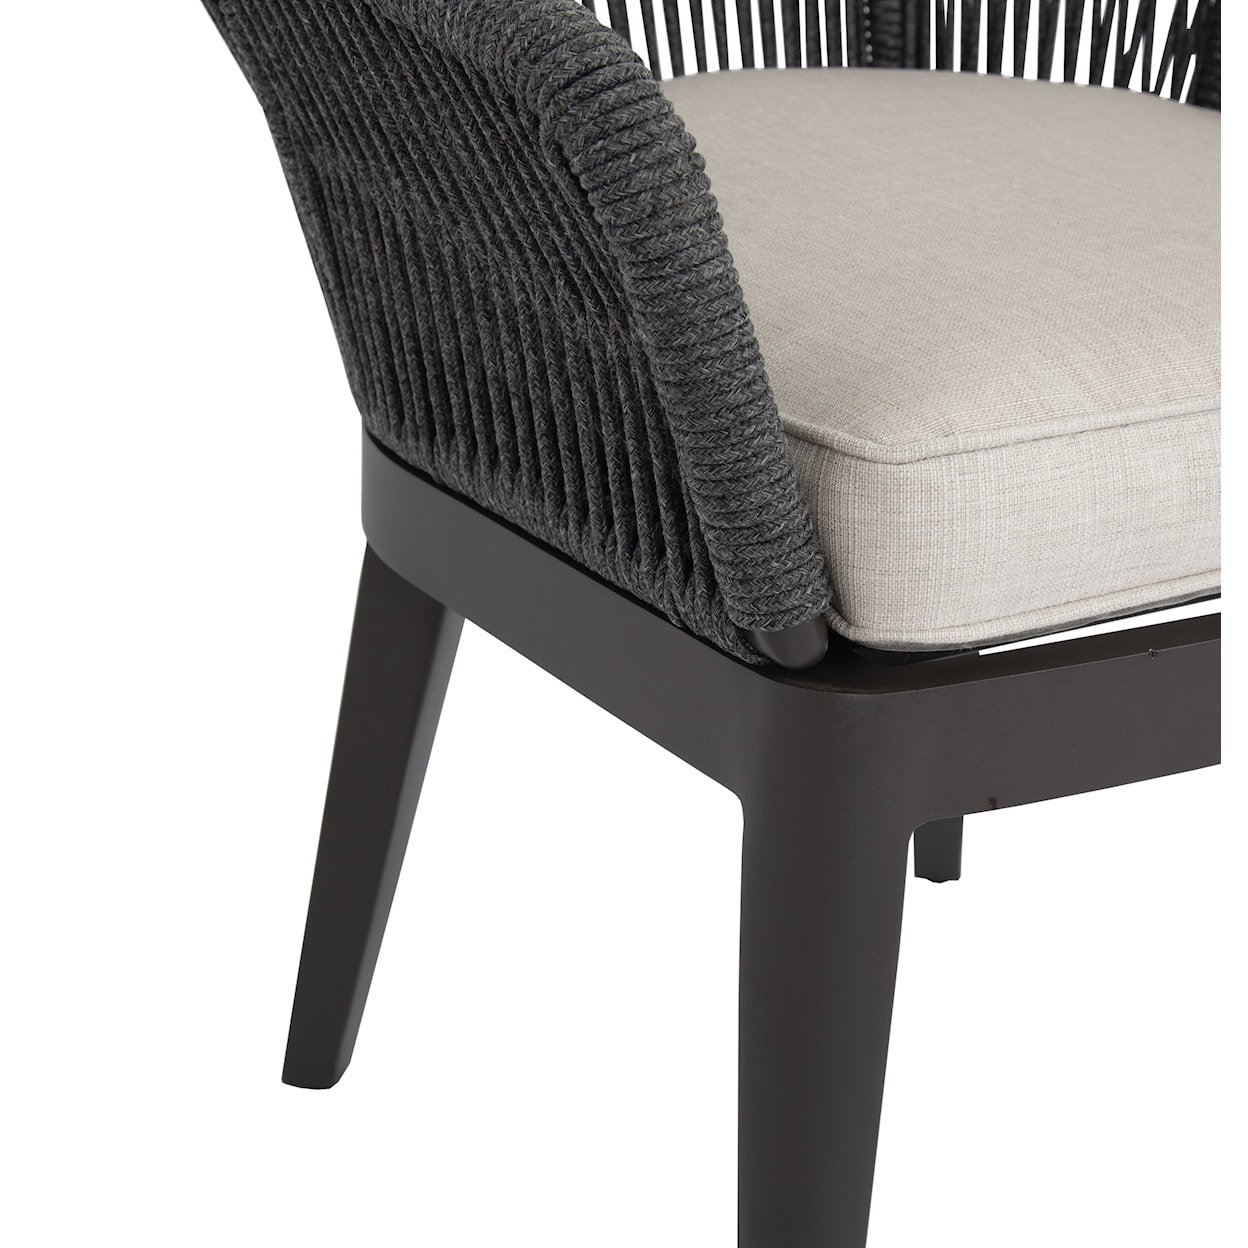 Sunset West Milano Upholstered Dining Chair